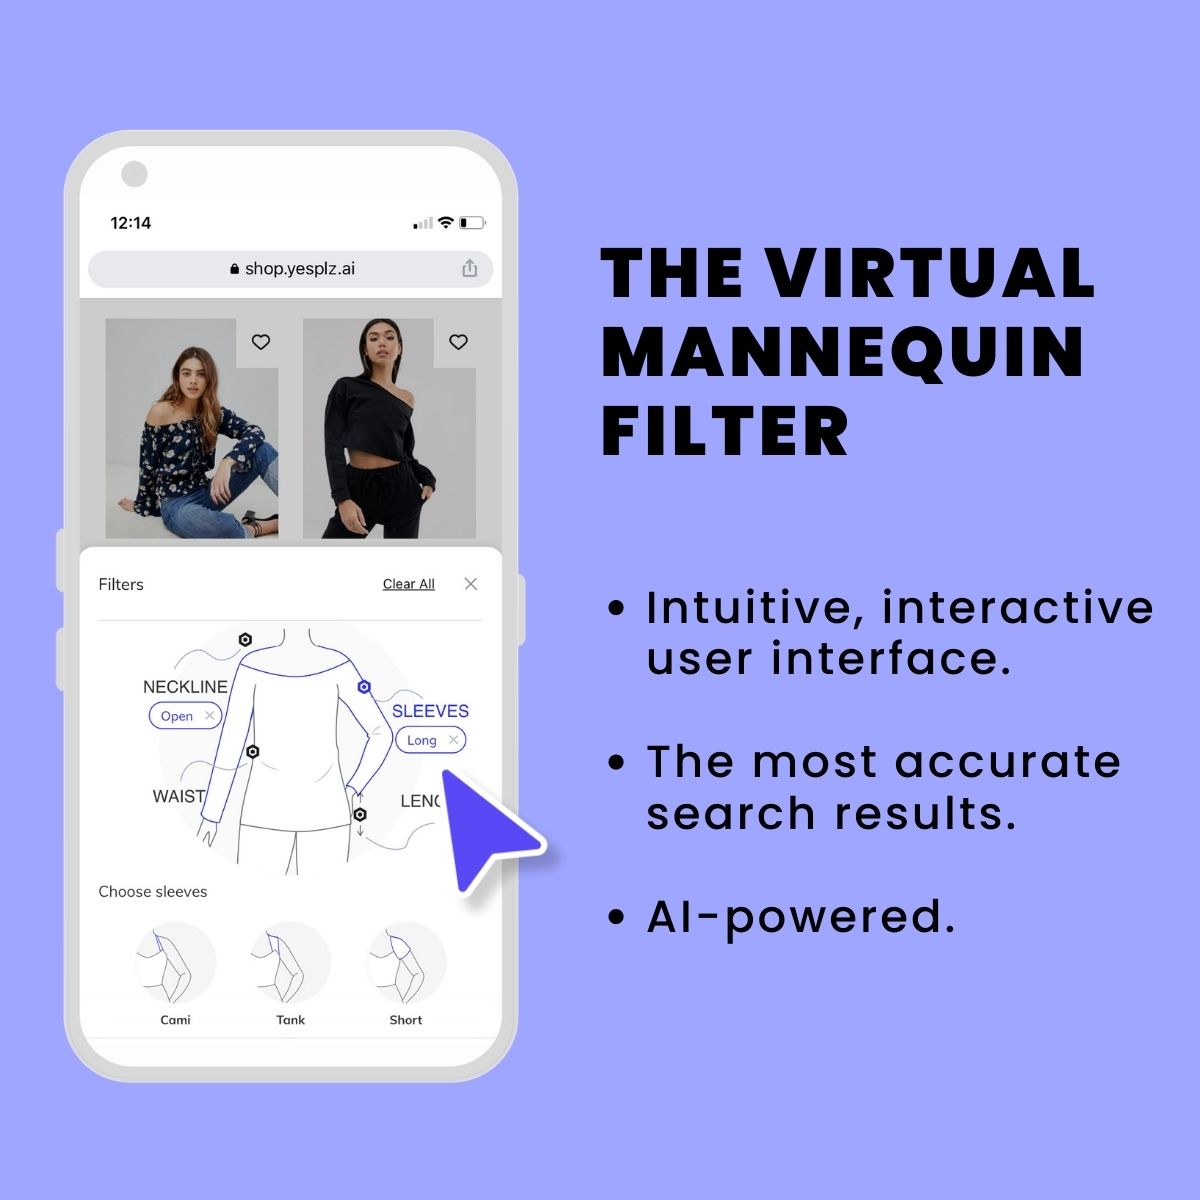 An image of virtual mannequin filter explaining top benefits